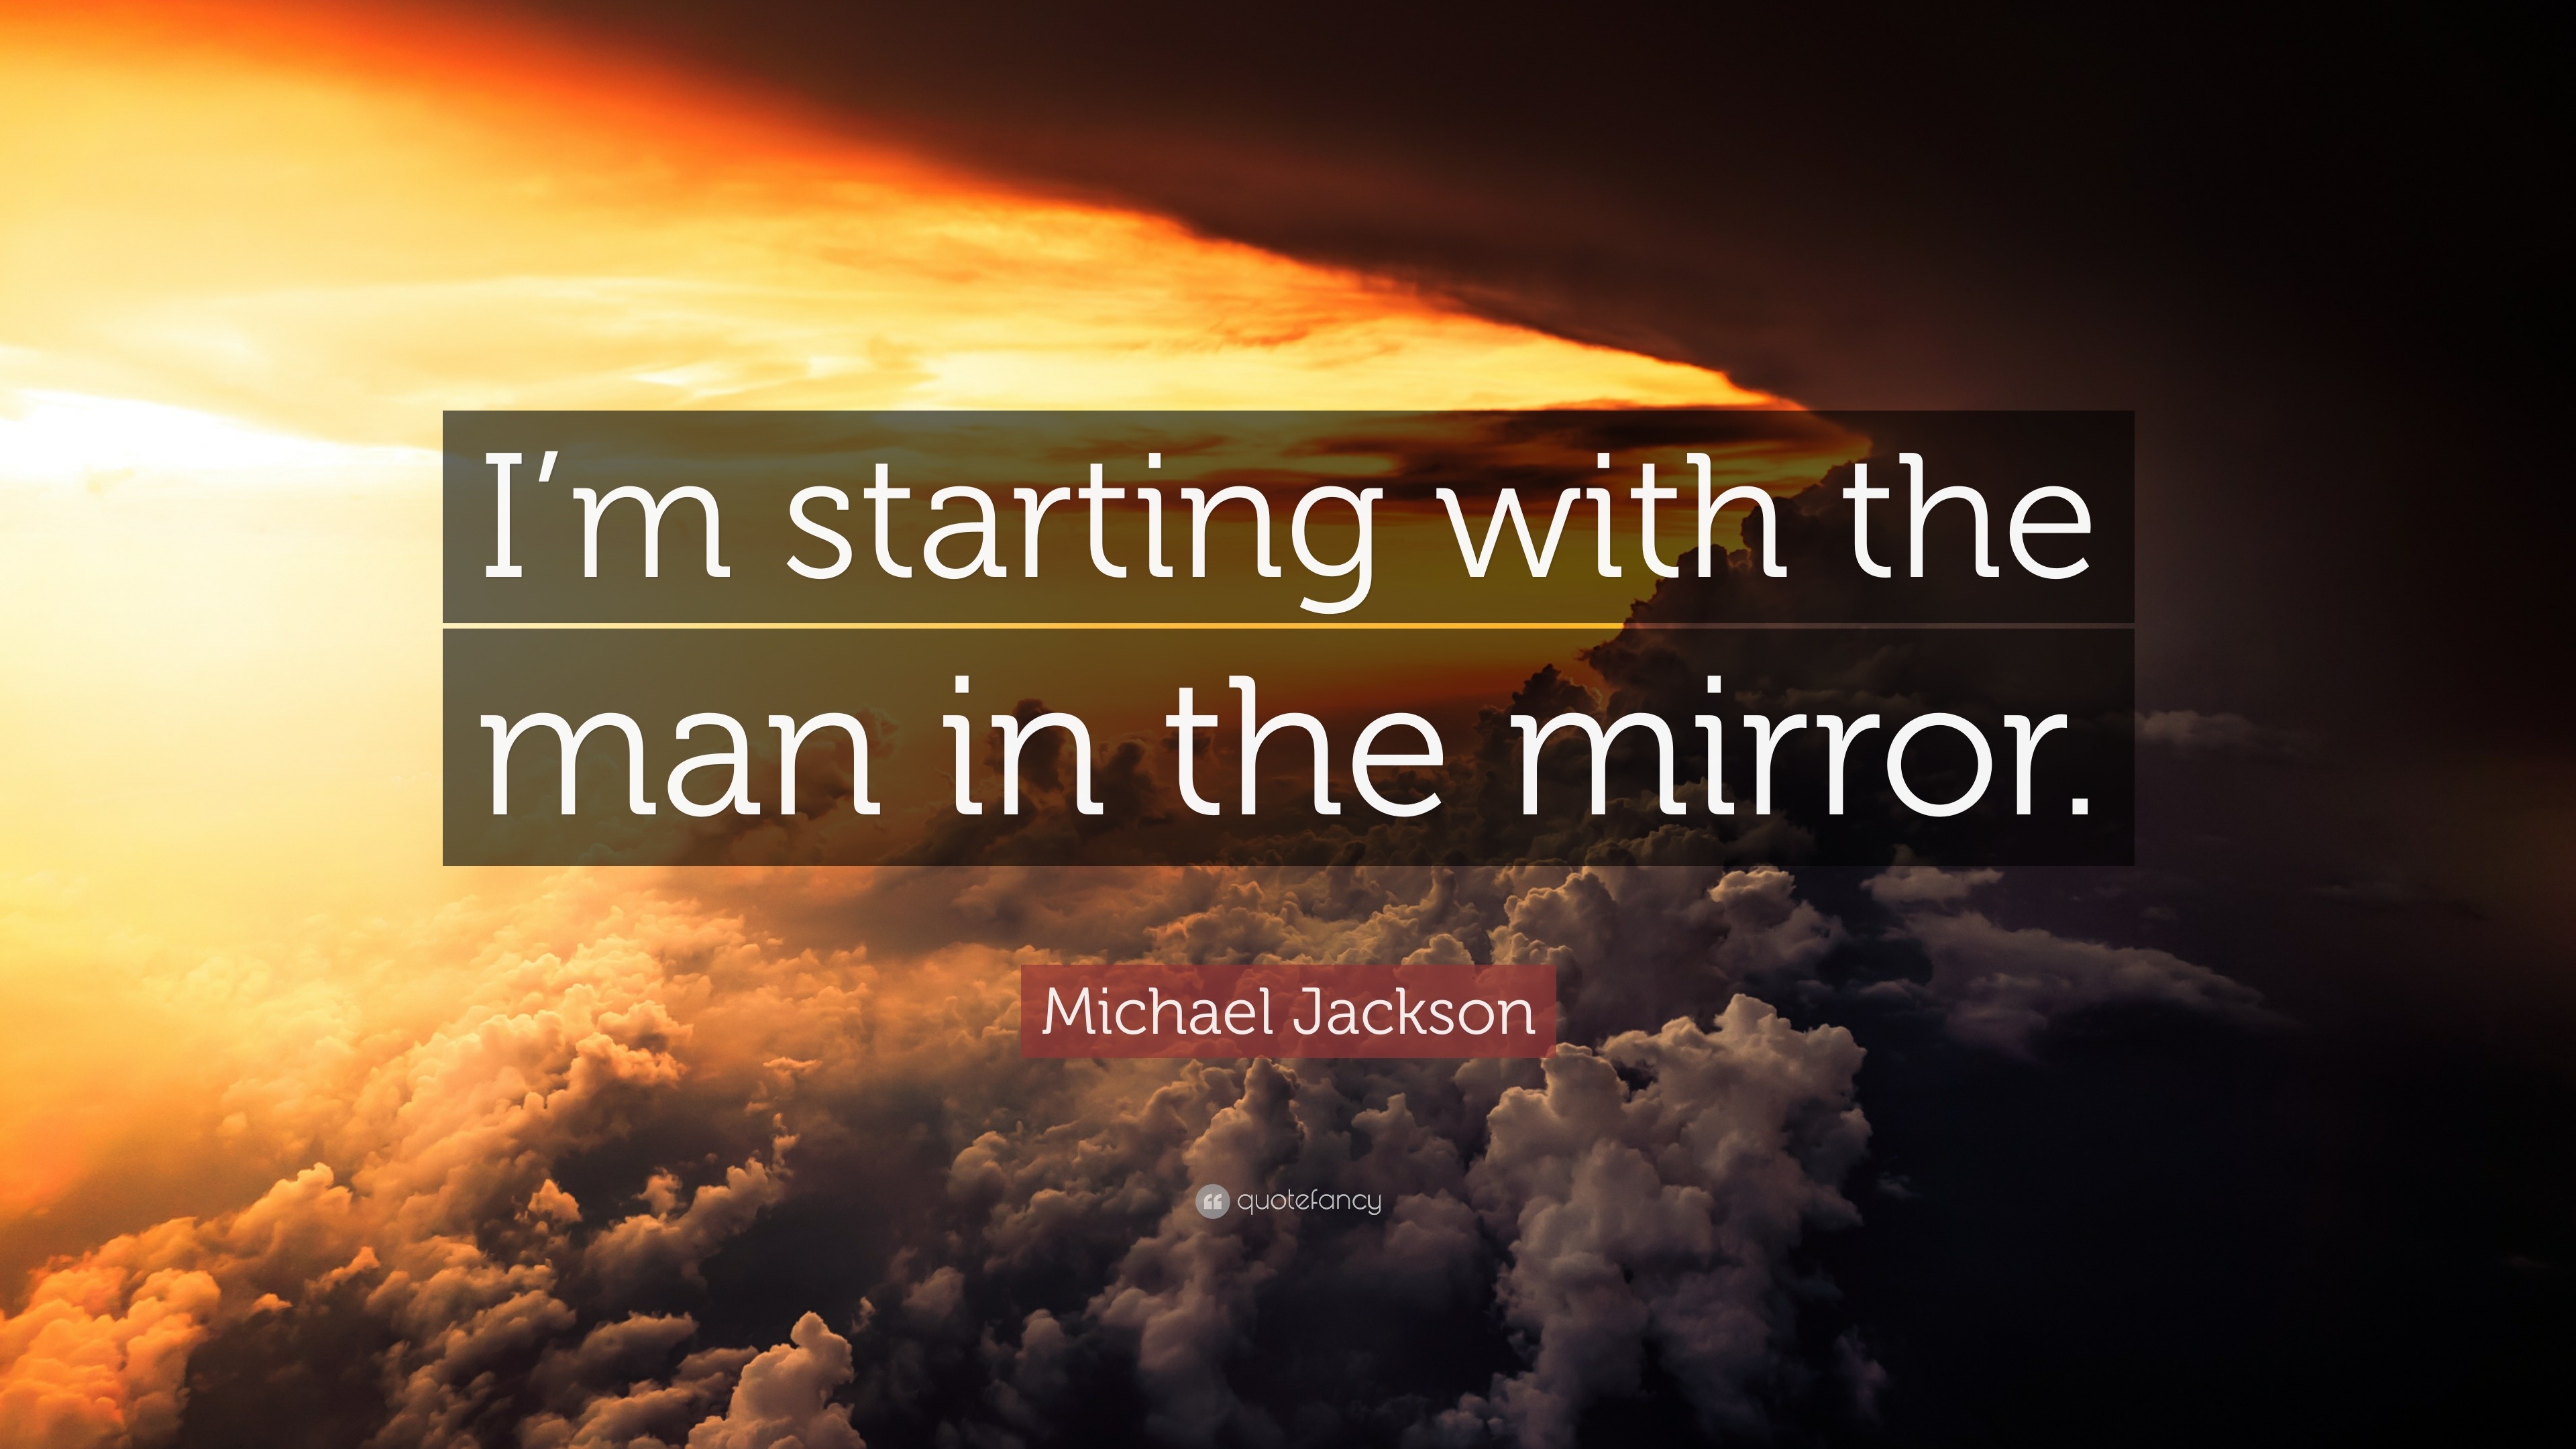 Michael Jackson Quote: “I'm Starting With The Man In The Mirror.”